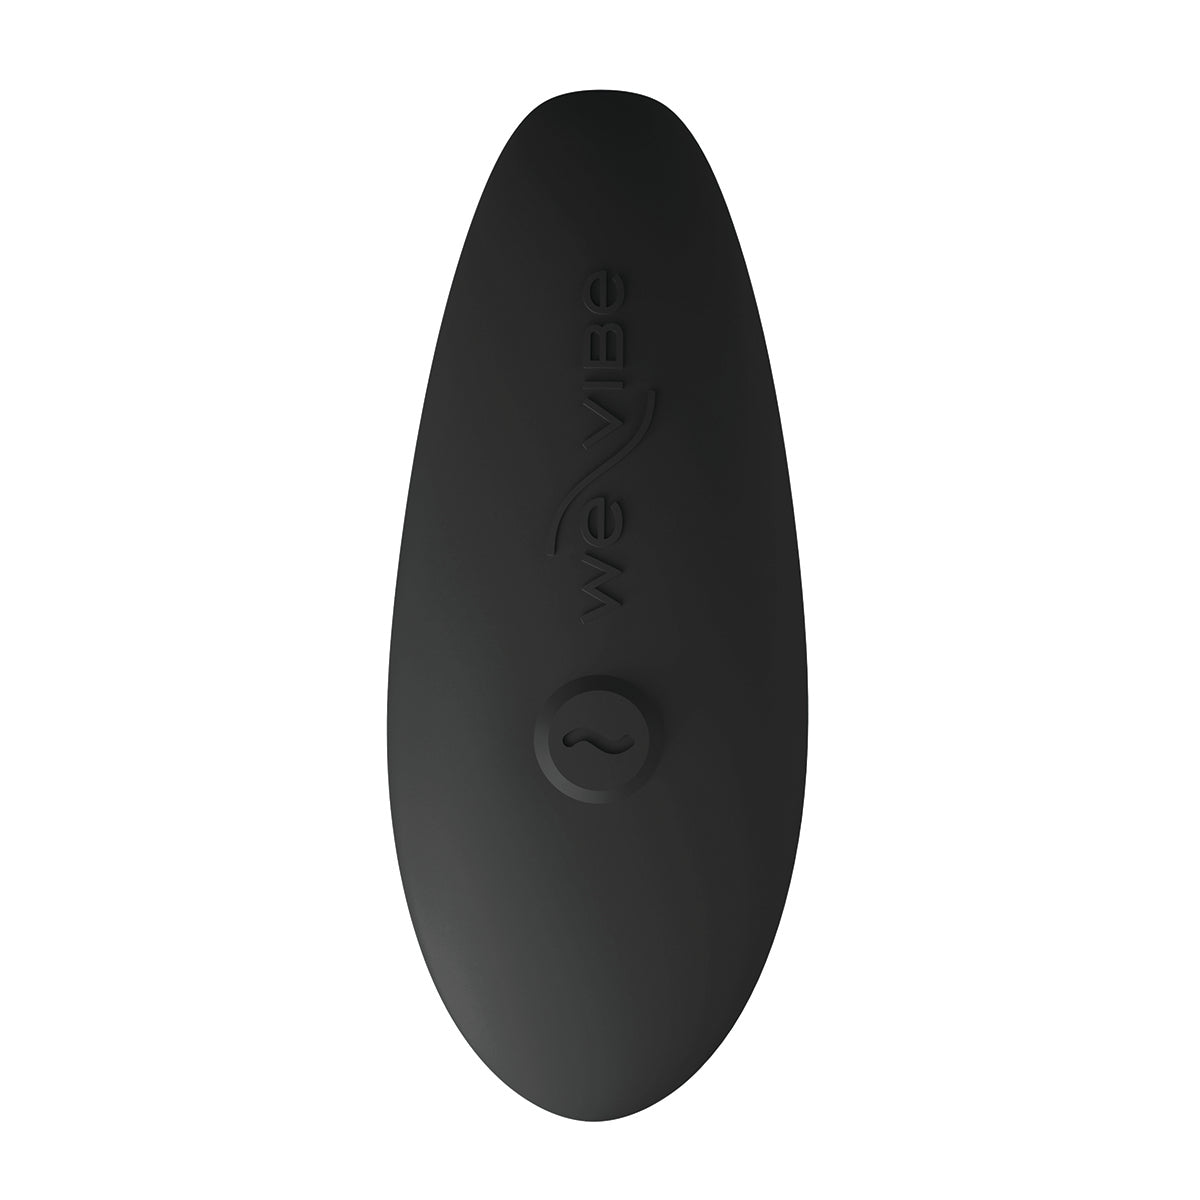 Fifty Shades of Grey® x We-Vibe - Moving As One Couple&#39;s Kit